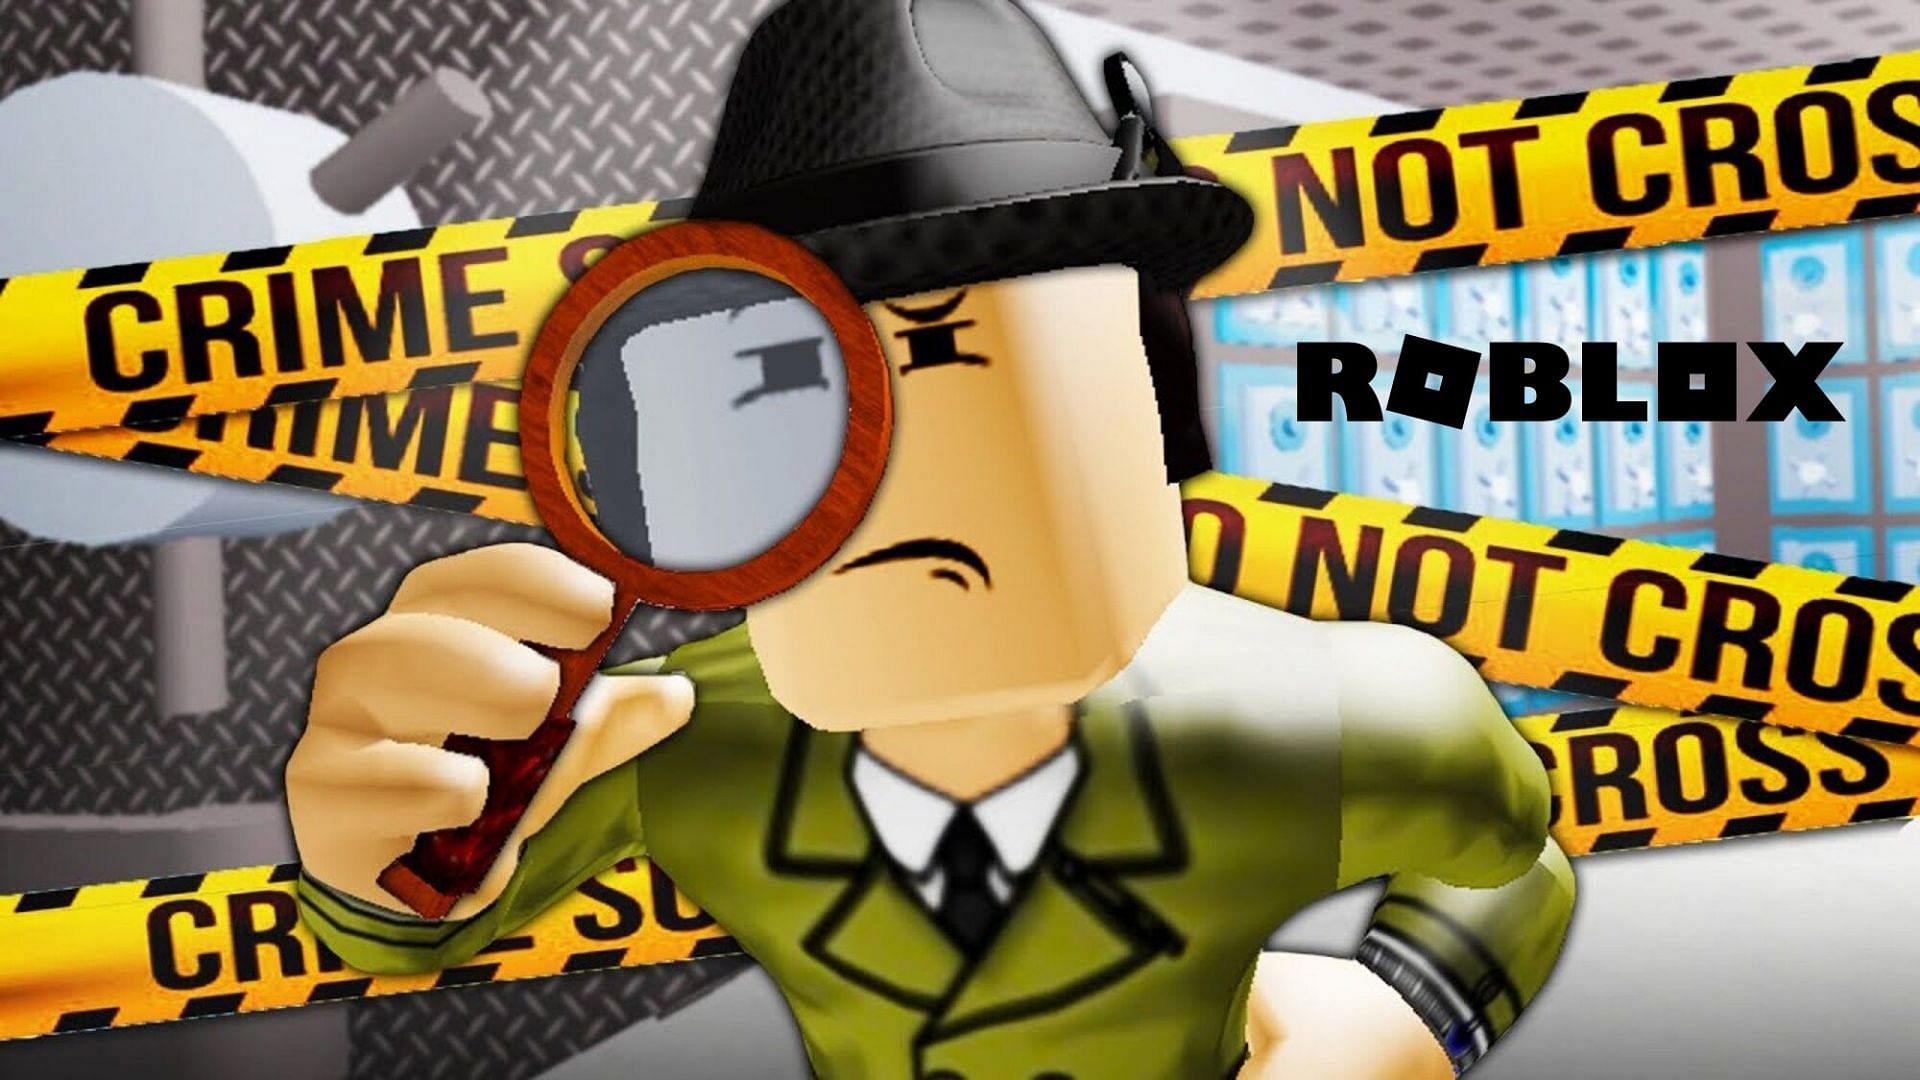 Solve mysteries like Sherlock Holmes in these Roblox games (Image via Roblox)